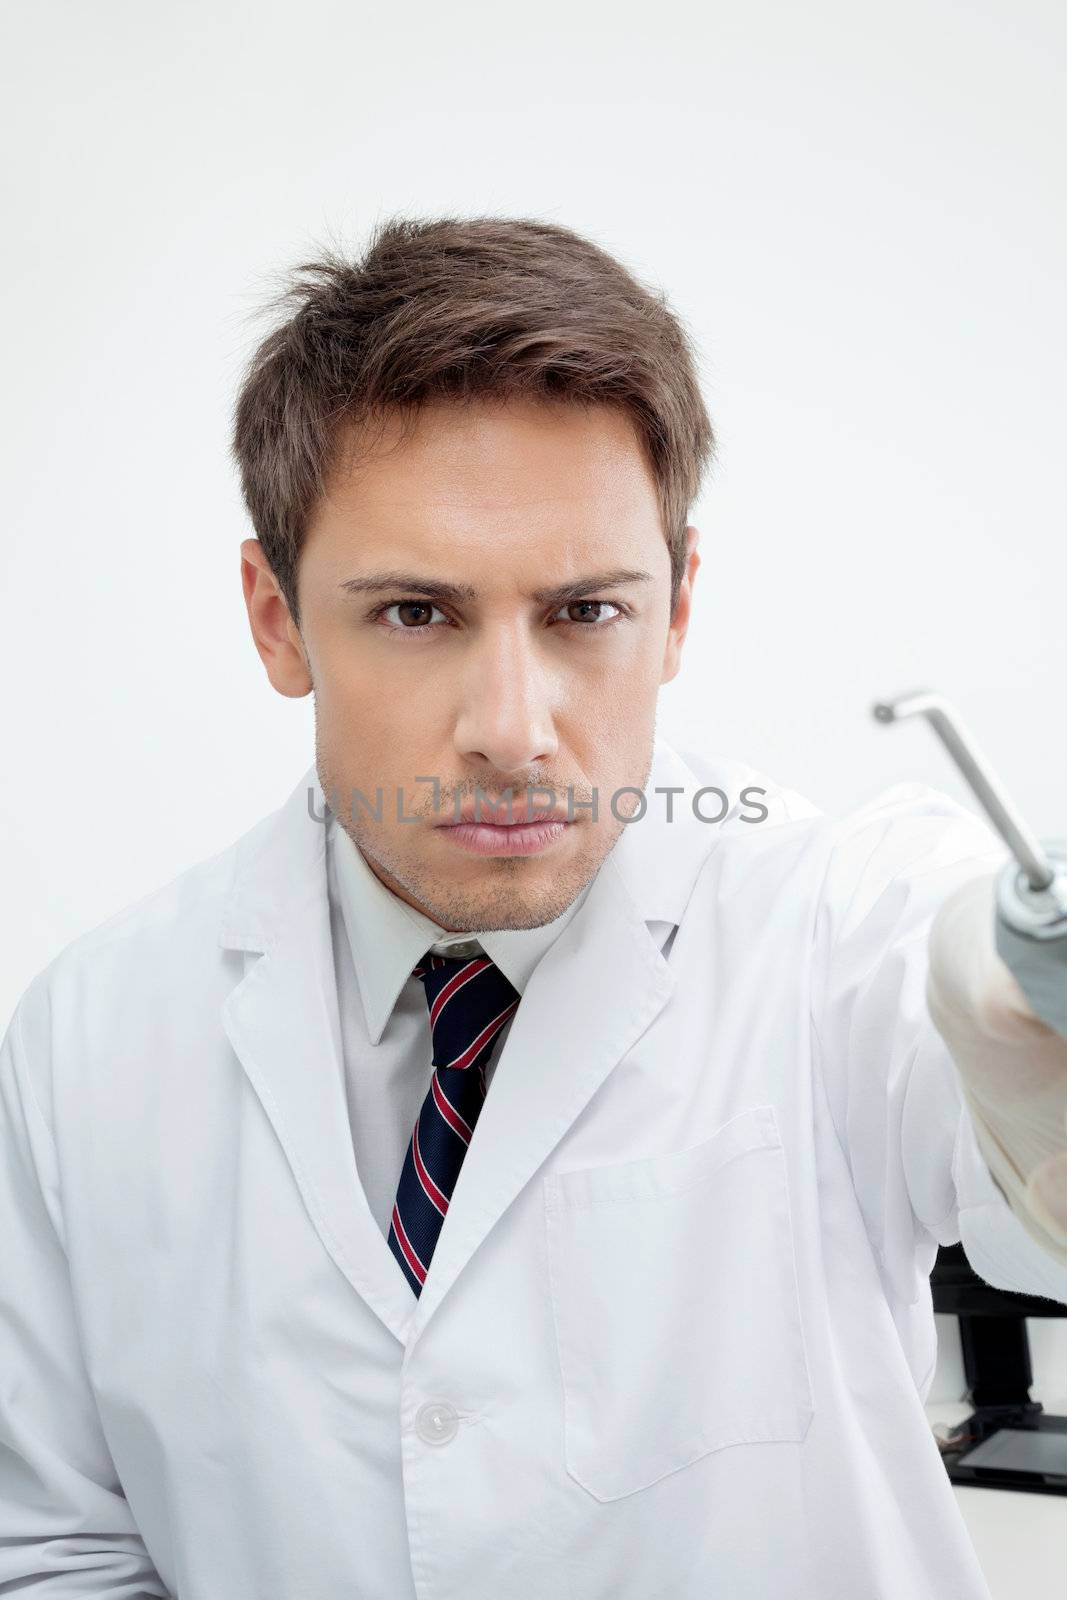 Dentist Holding Water Spraying Tool by leaf